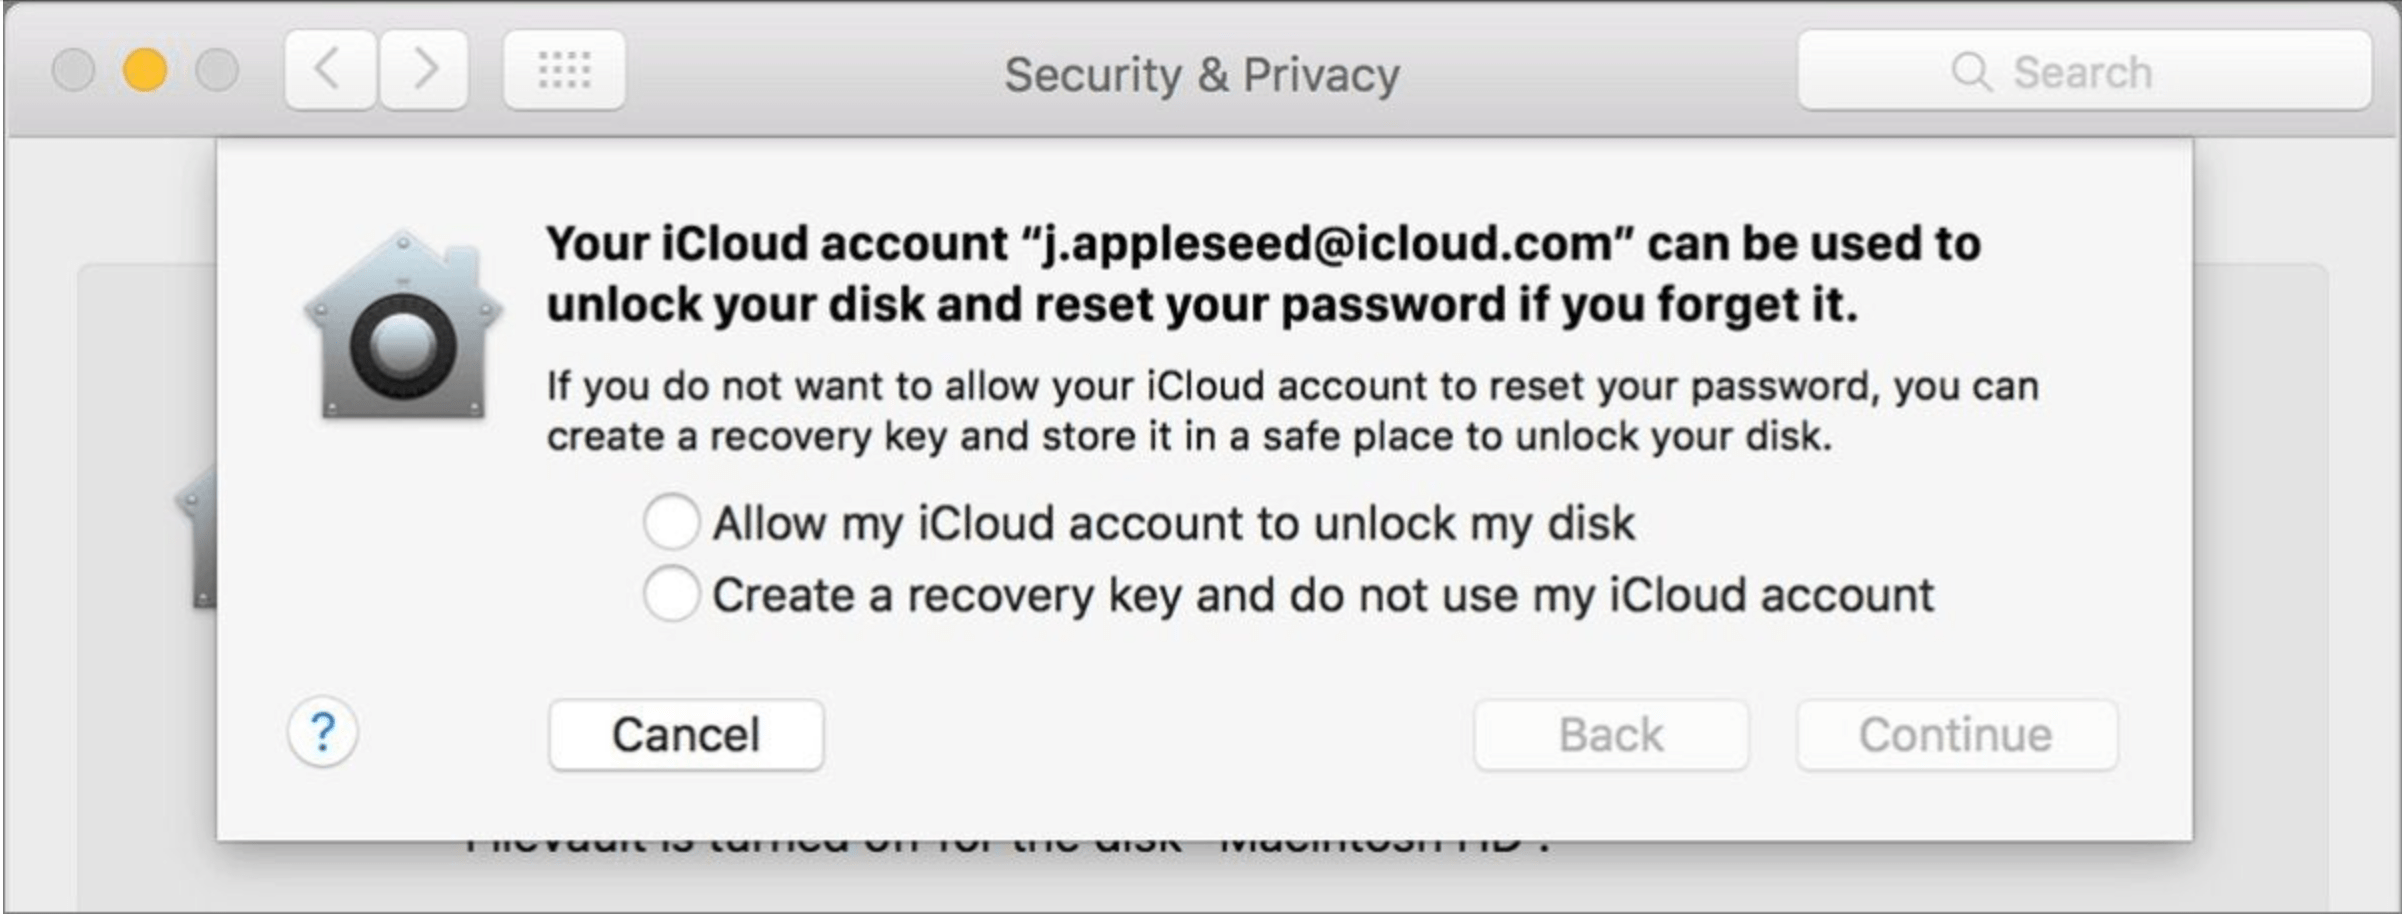 choose iCloud account or recovery to unlock your disk with FileVault